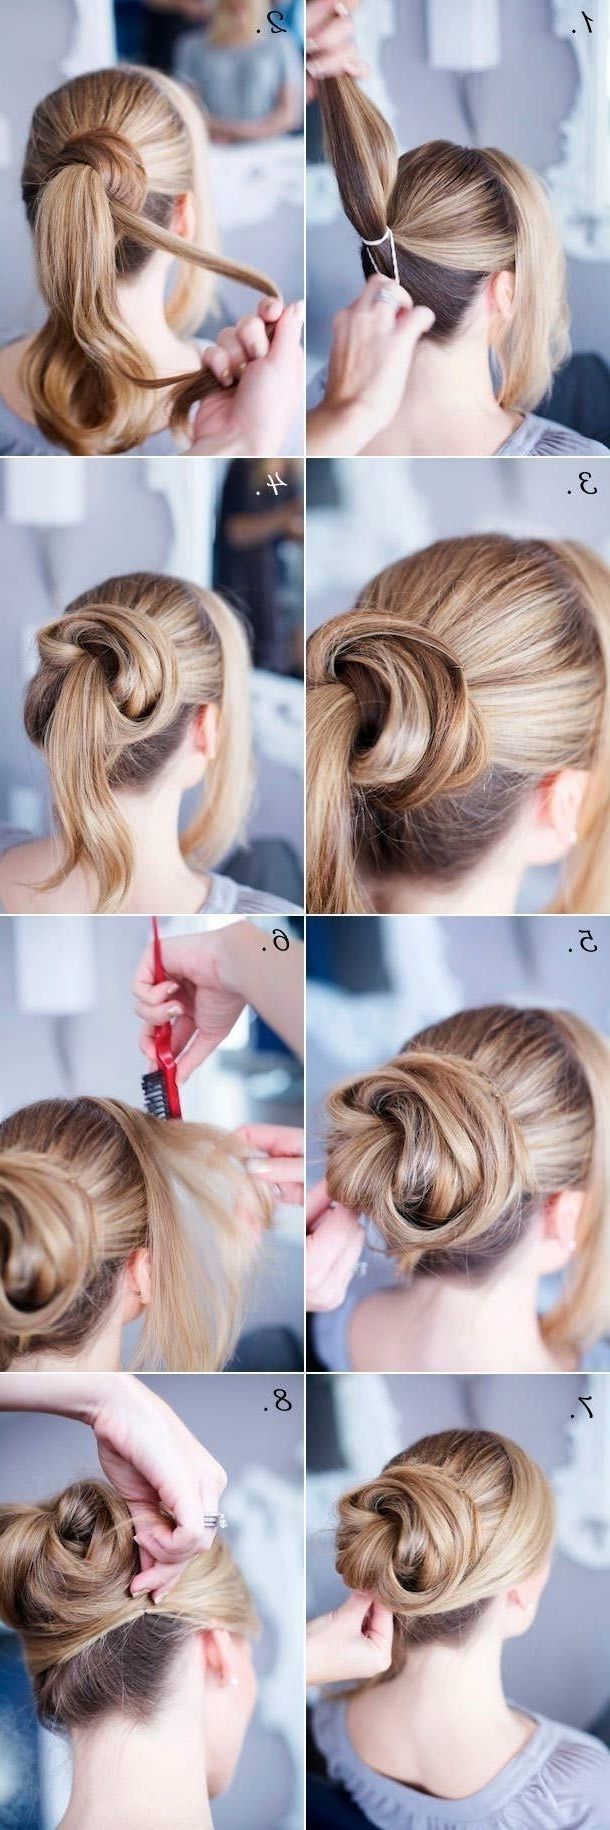 14 Easy Stepstep Updo Hairstyles Tutorials – Pretty Designs Inside Easy Updo Long Hairstyles (View 4 of 15)